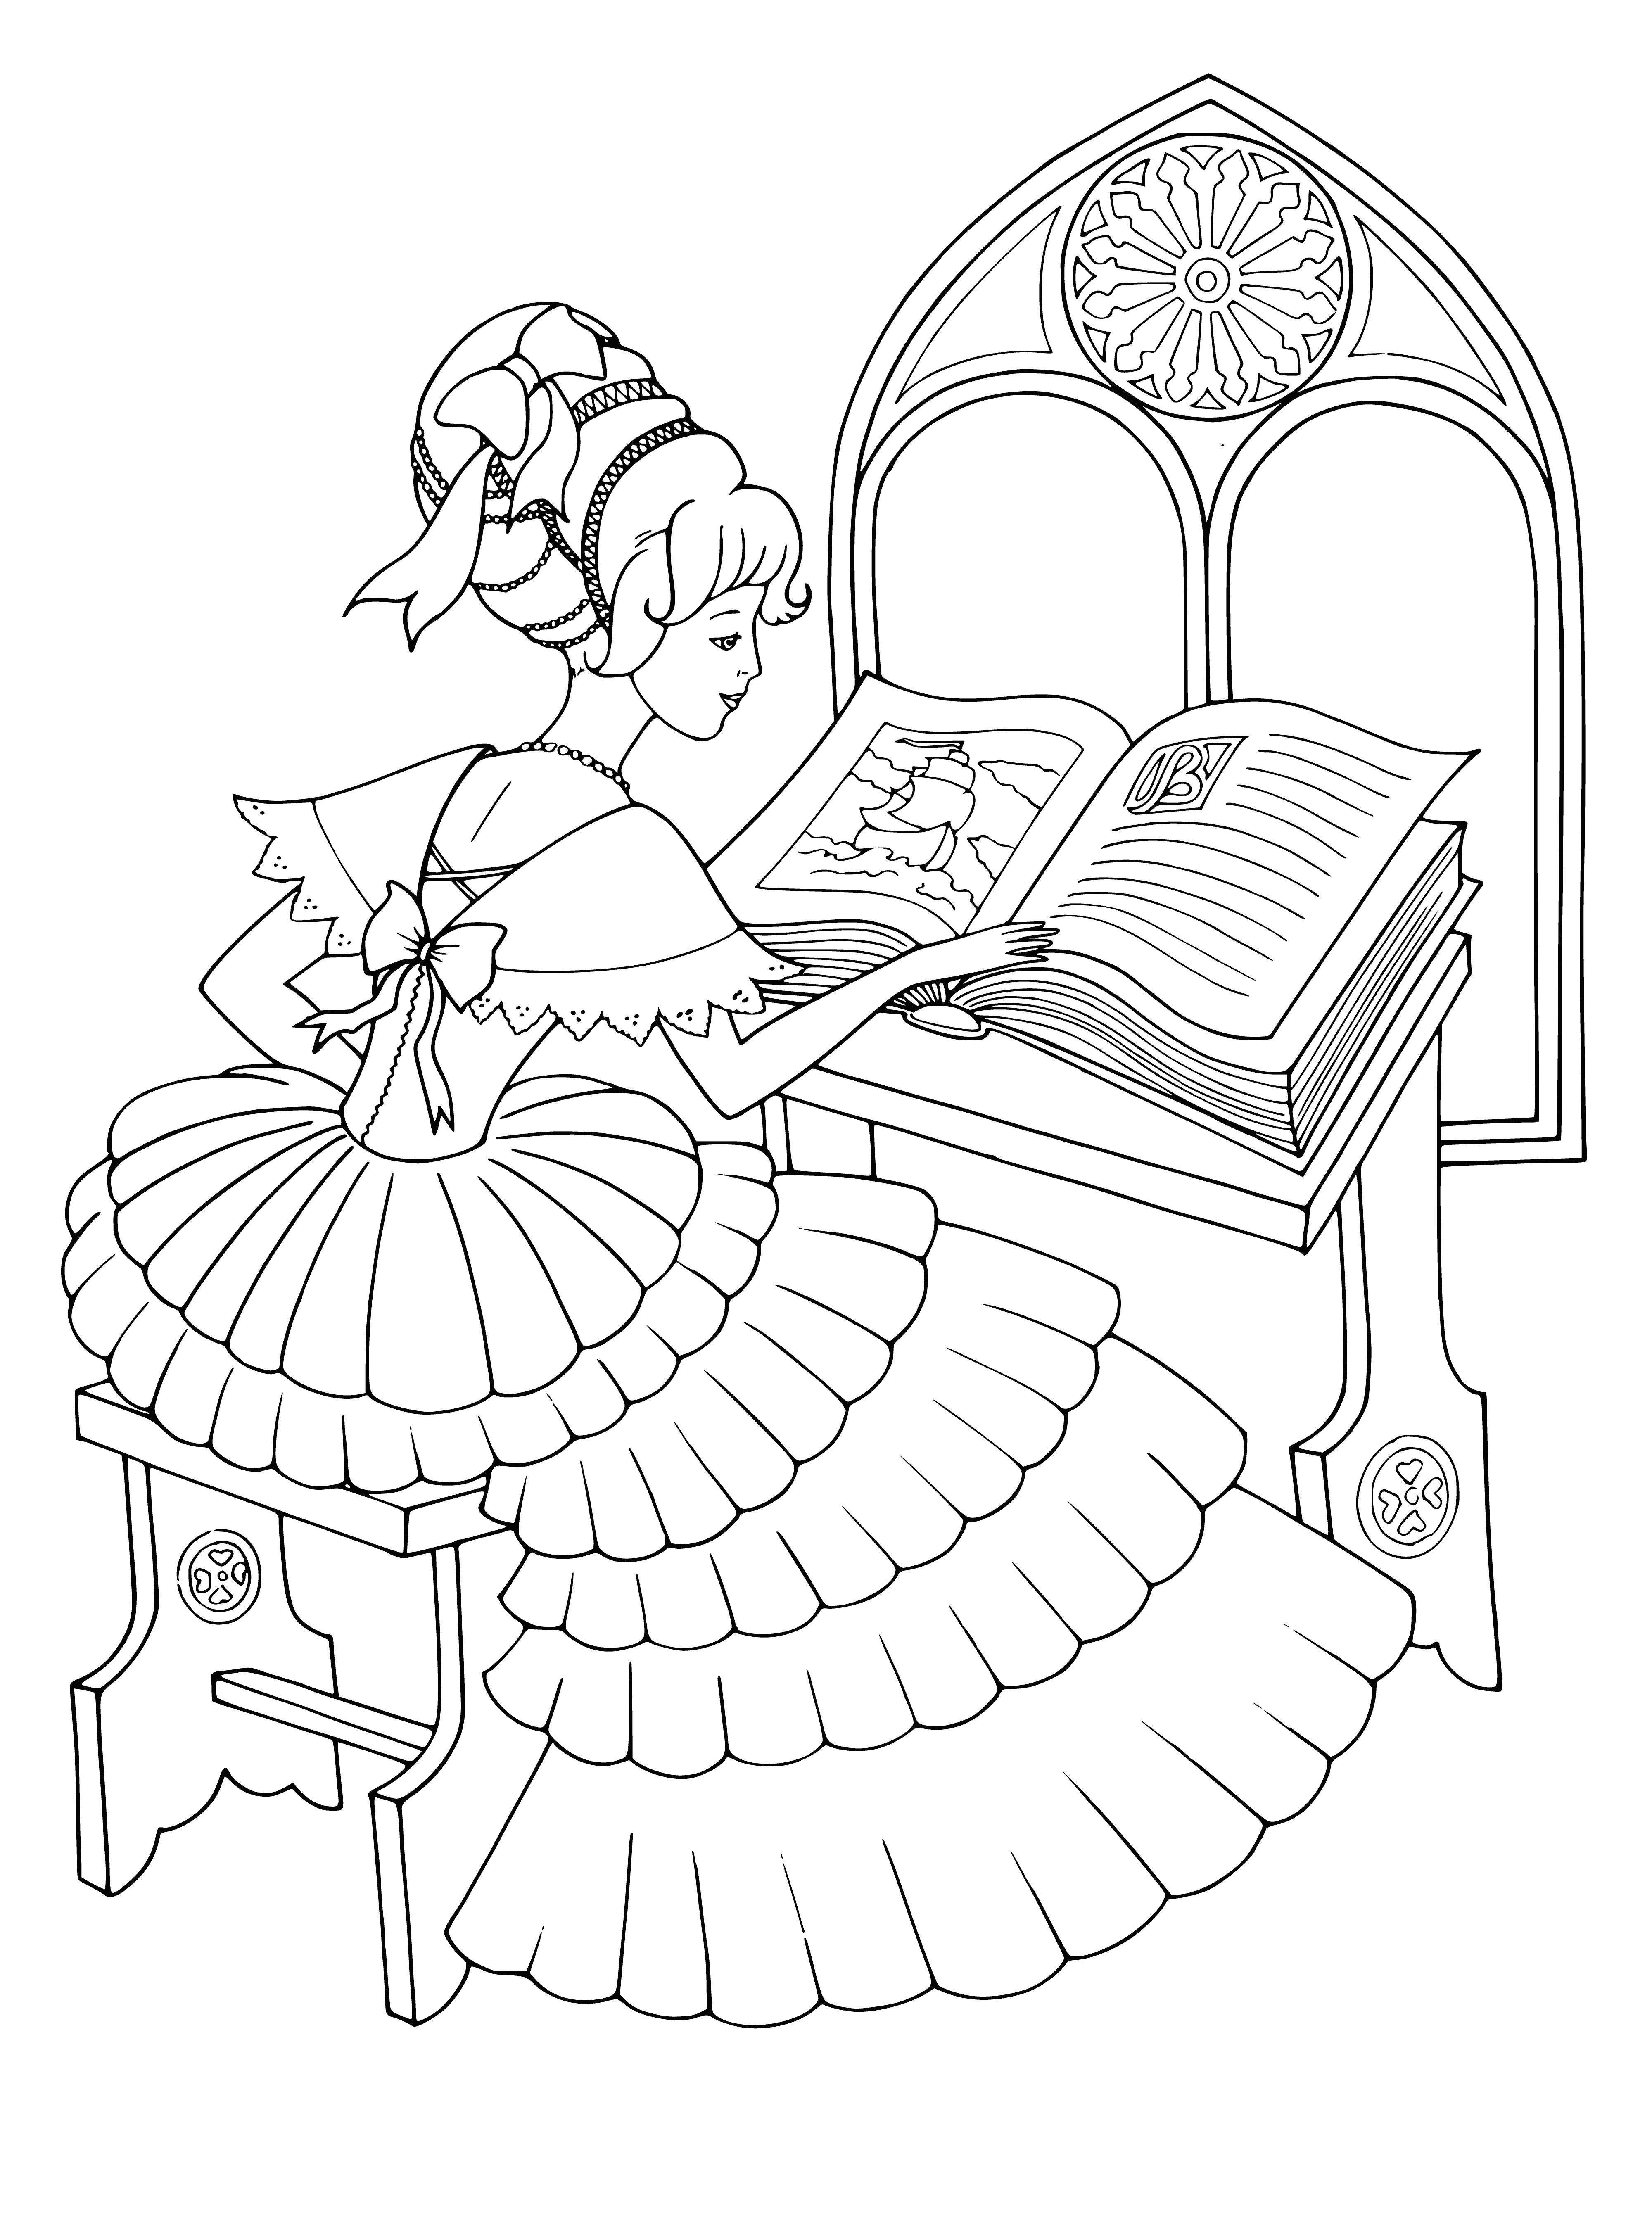 coloring page: The princess reads a book of fairy tales in her flowered dress, golden crown, and castle backdrop.